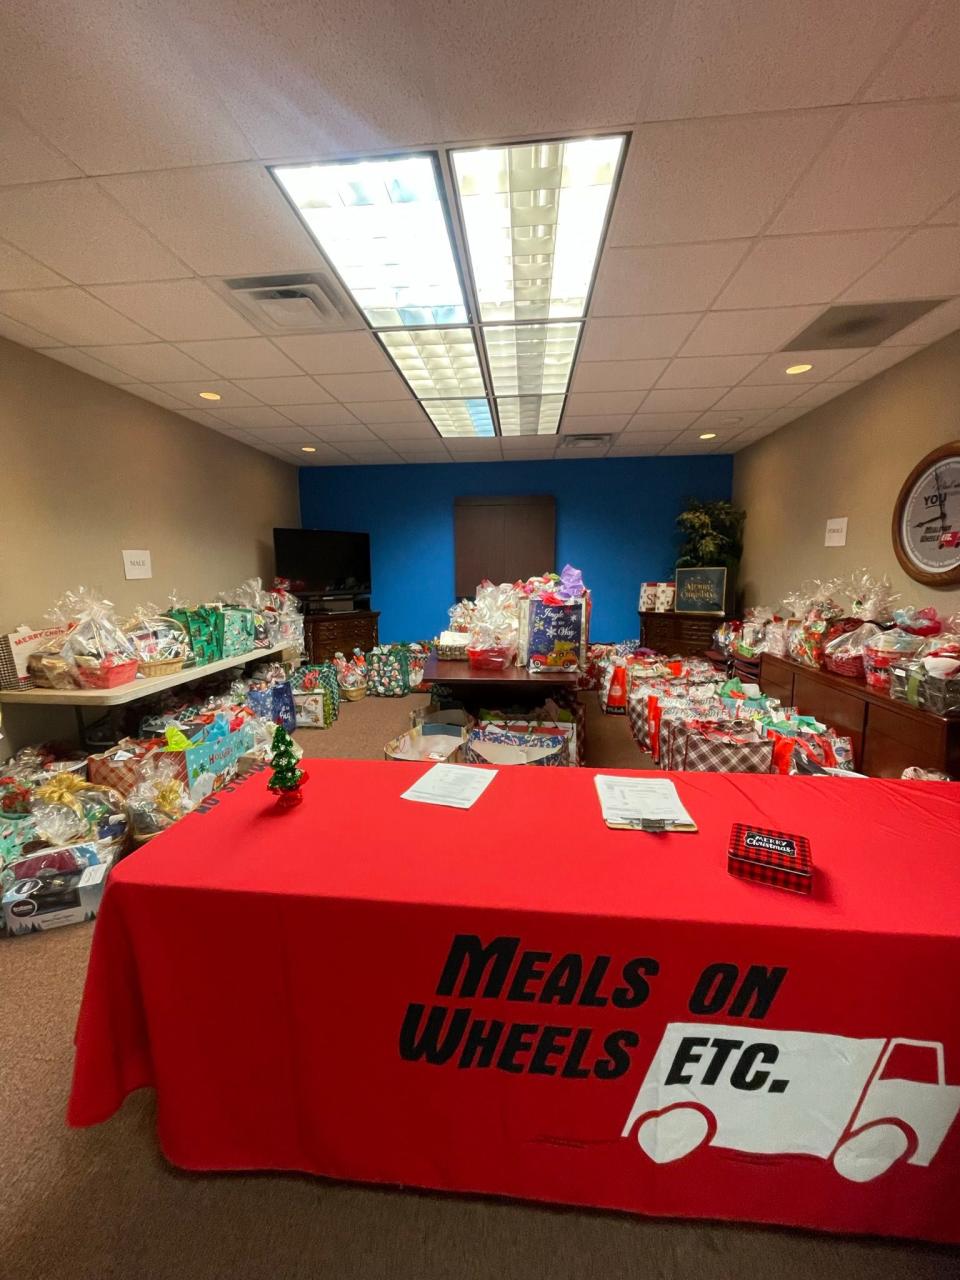 Meals on Wheels, Etc. distribute gift baskets and donations through the Adopt-A-Senior for the Holiday program.